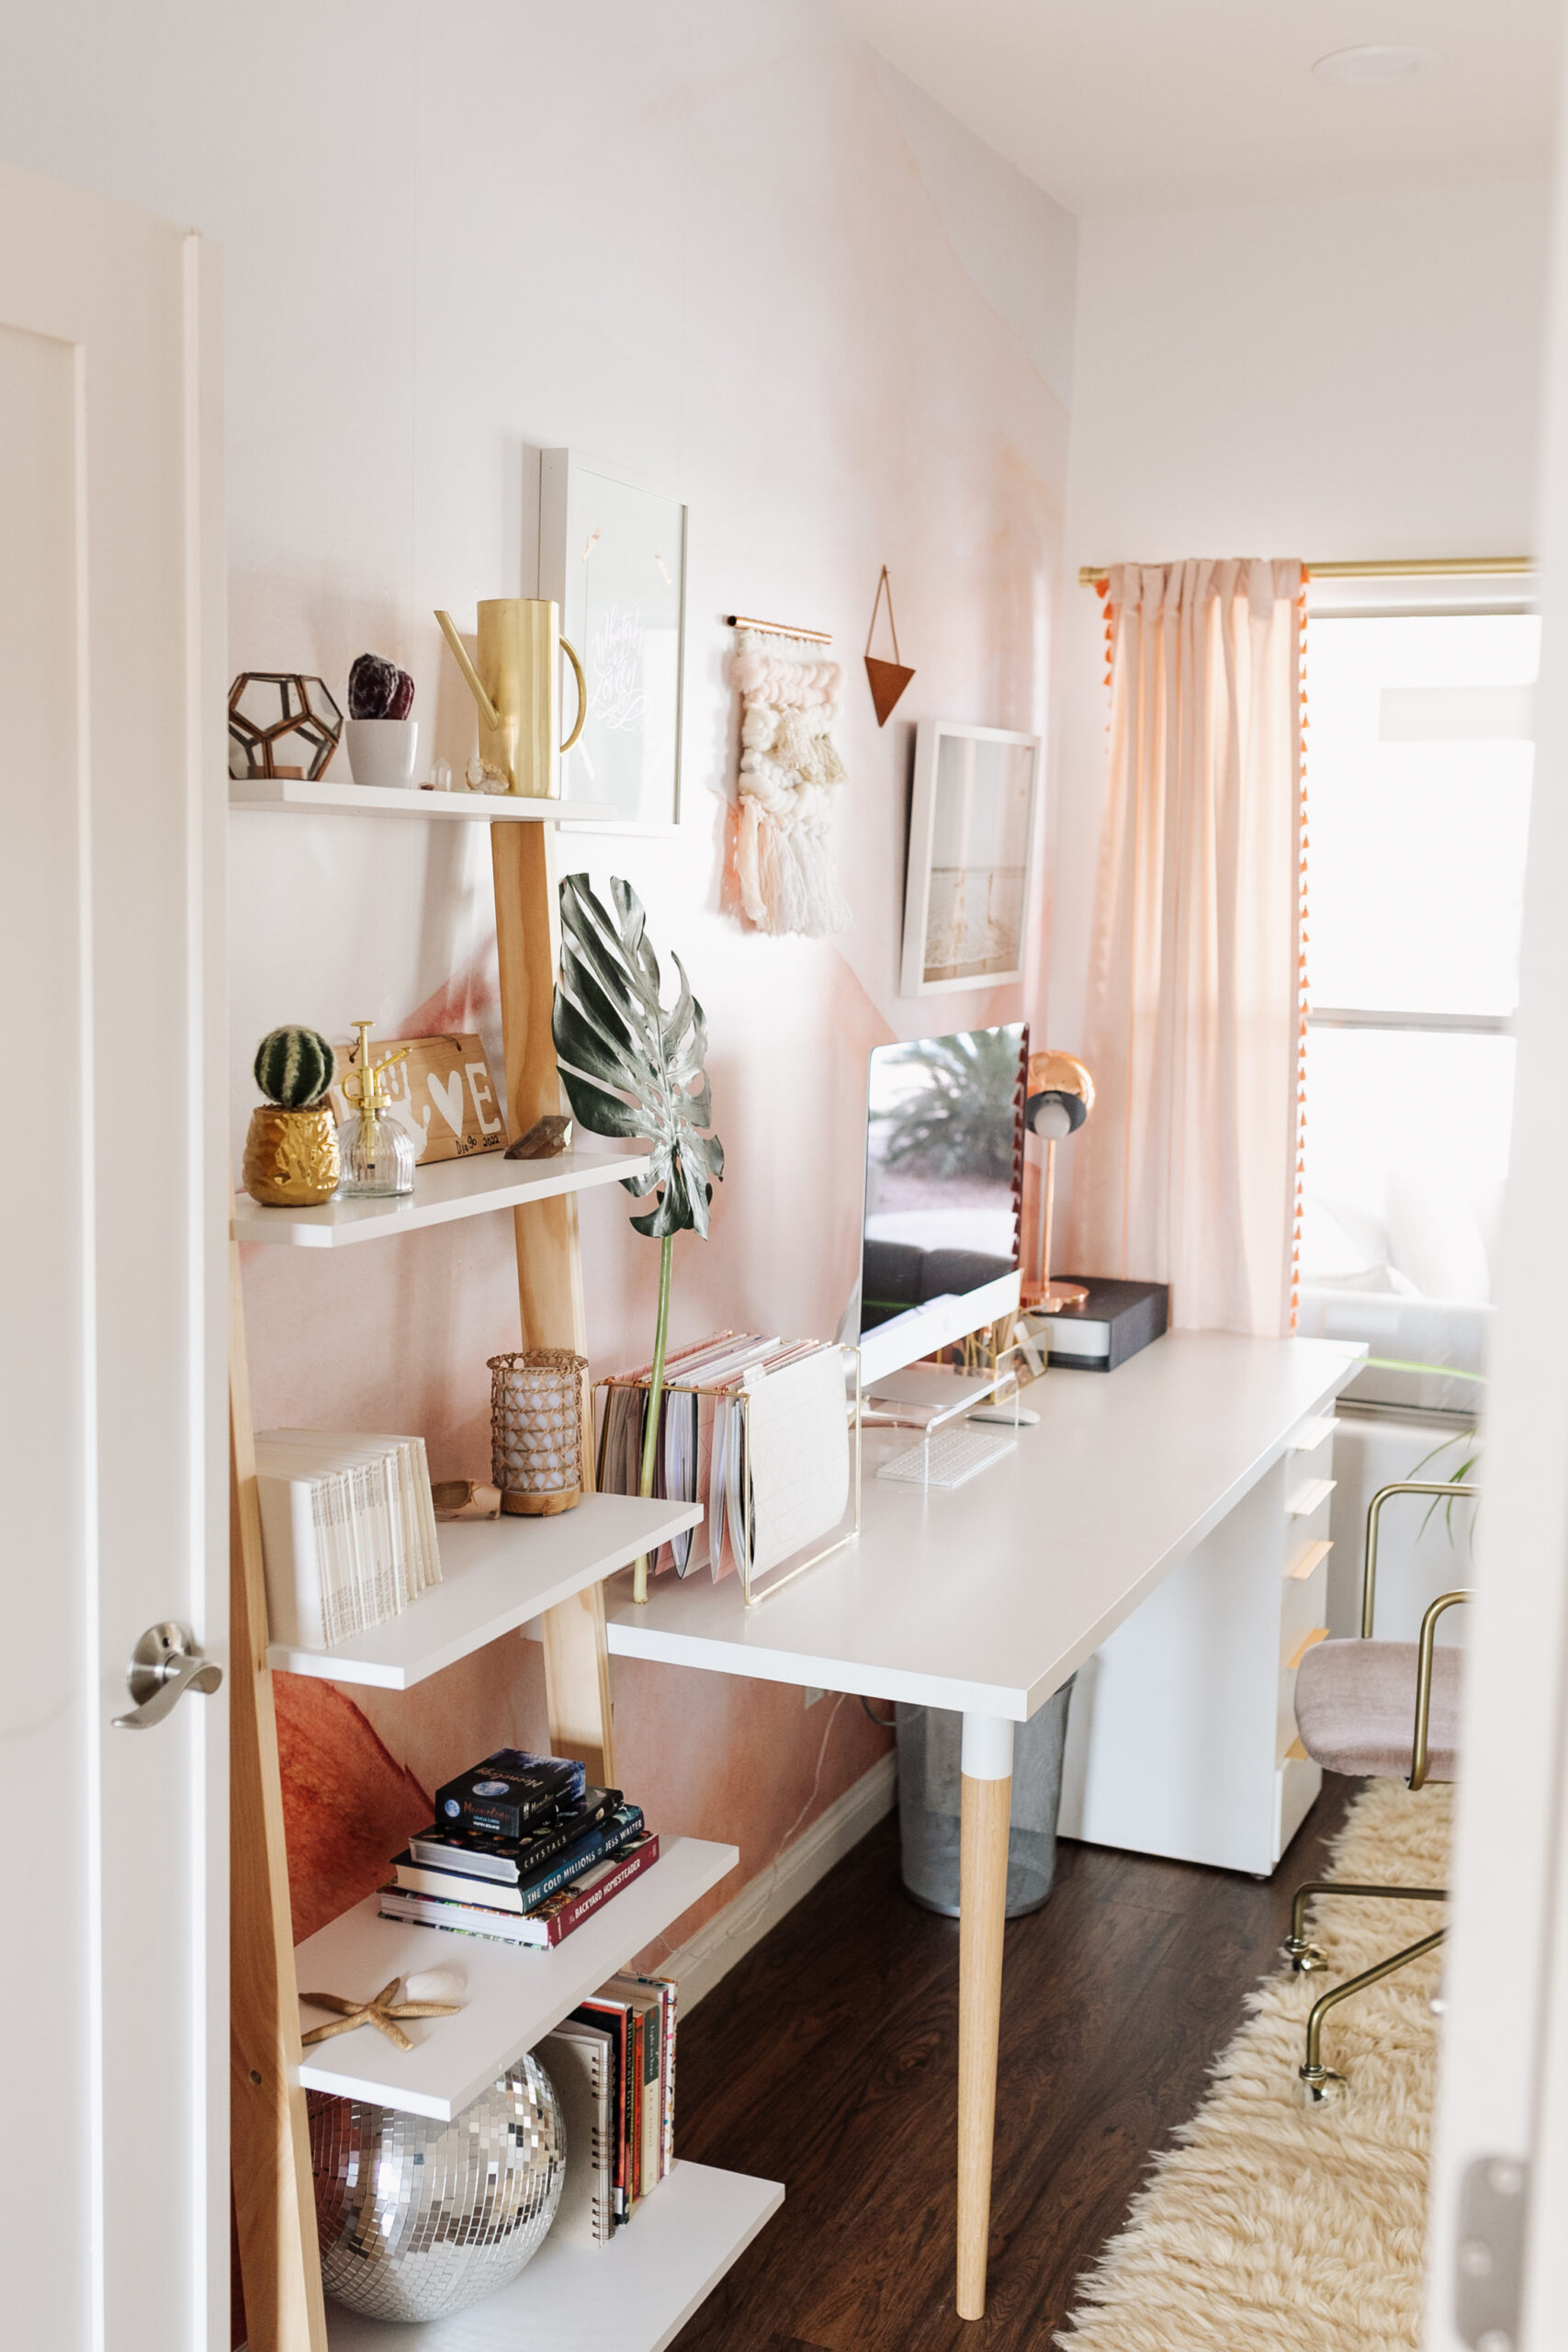 updated feminine office reveal in the ldl home #feminineoffice #wallblush #theldlhome